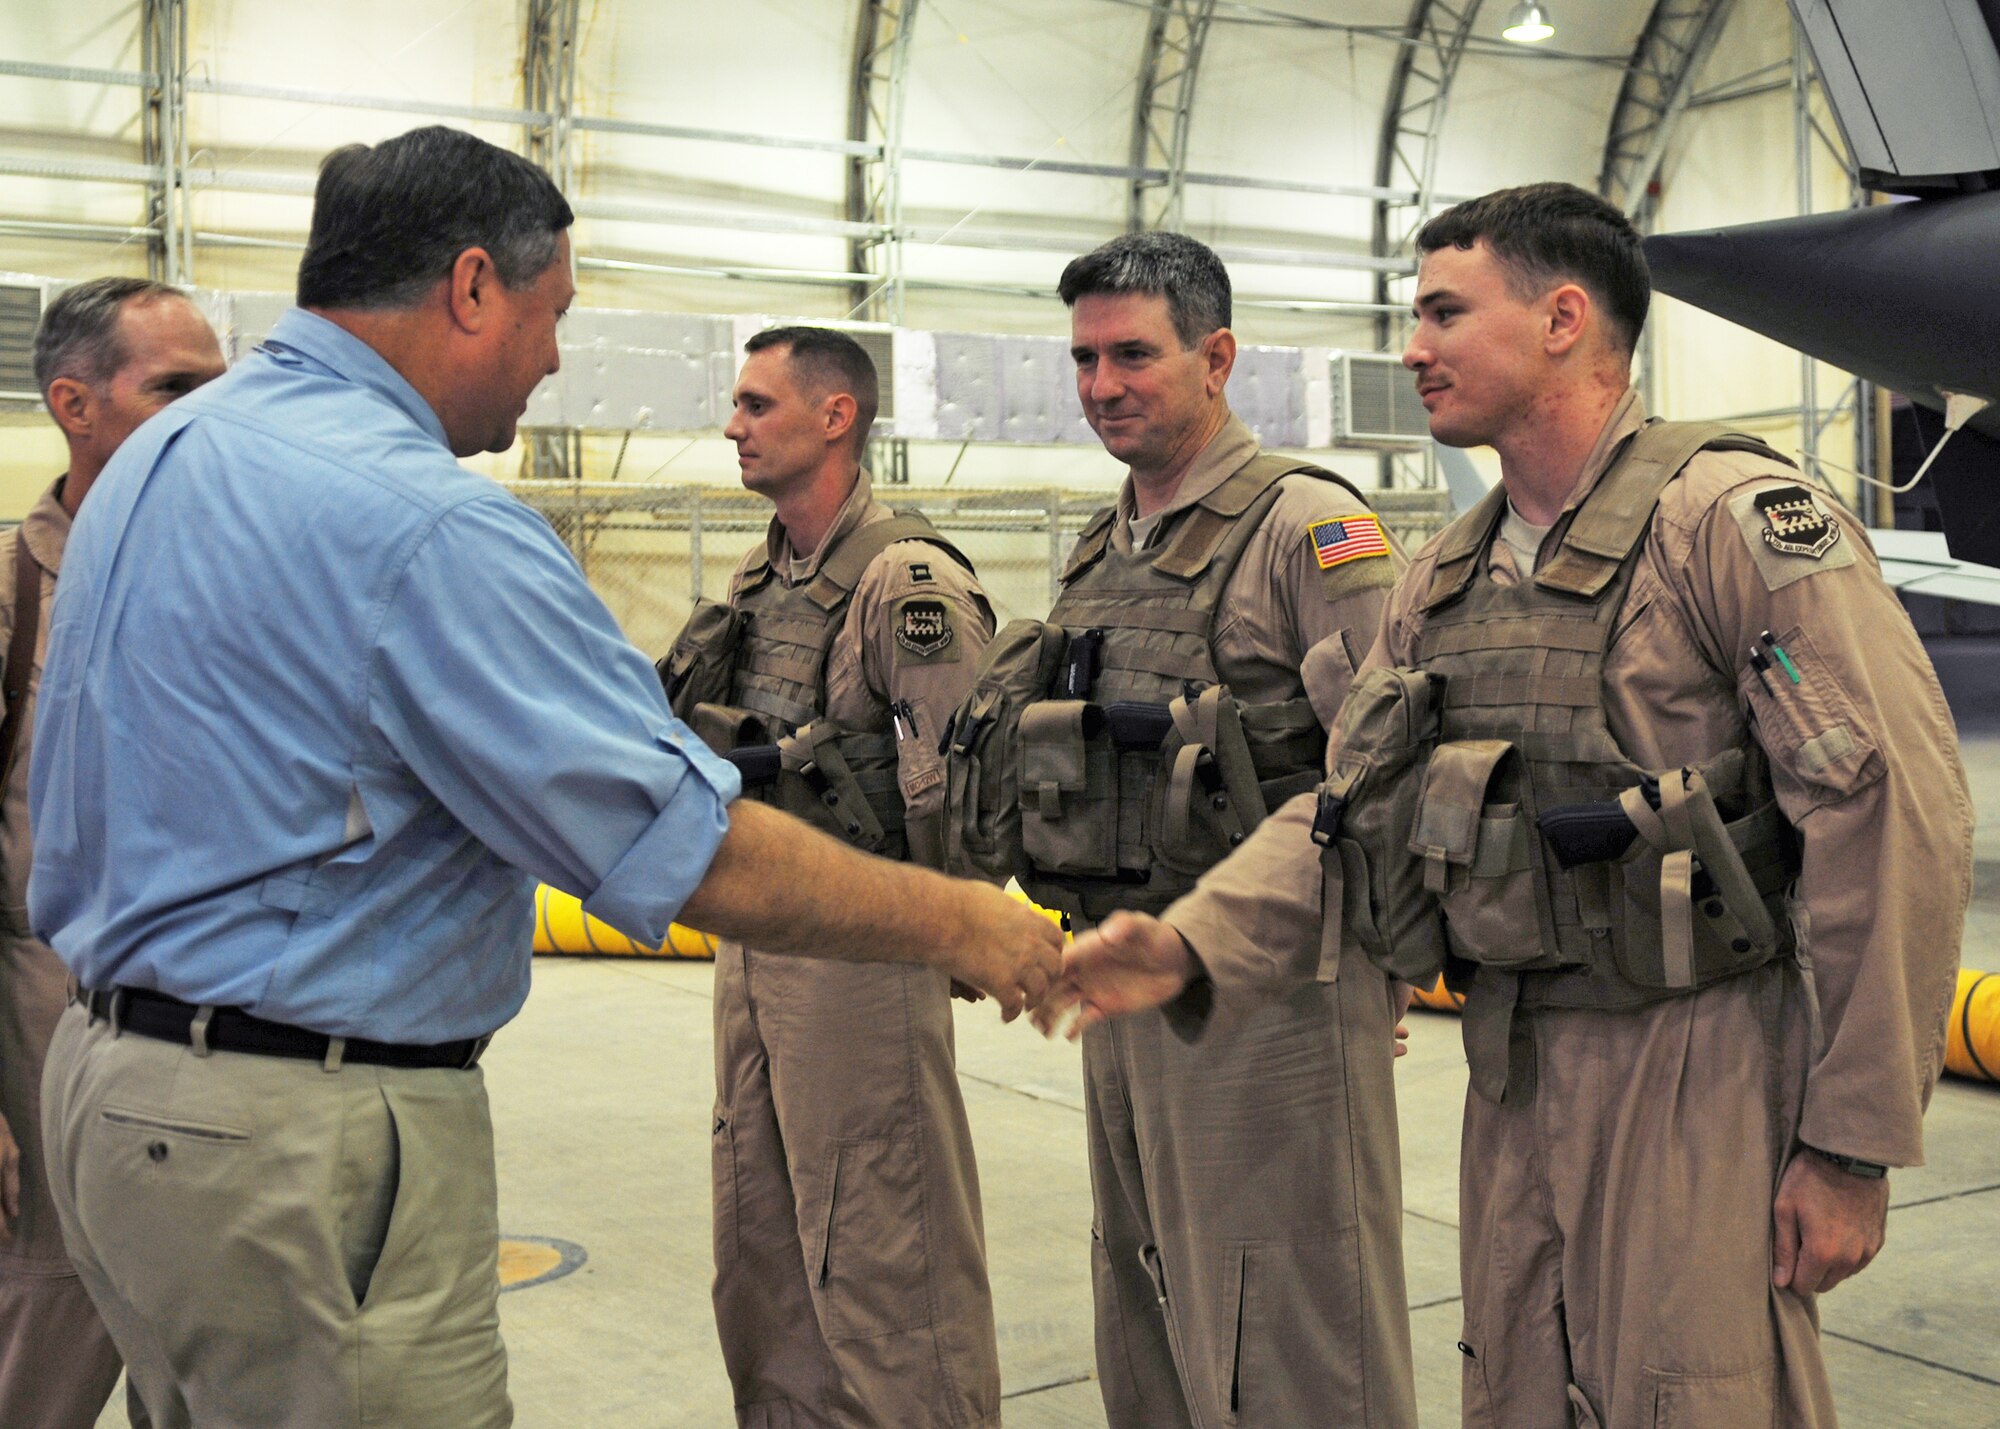 Secretary of the Air Force Michael Donley greets an MC-12 Liberty aircrew, Aug. 27 during a tour of Joint Base Balad, Iraq.  Capt. Matthew Eldredge (from left), Senior Master Sgt. Bruce Hunter and Senior Airman Matt Jones are assigned to the 362nd Expeditionary Reconnaissance Squadron.  A 362nd ERS aircrew flew the MC-12's first combat mission June 12.  The unit now operates six MC-12s and provides real-time full-motion video and signals intelligence that allows military leaders to make rapid battlefield decisions. Secretary Donley visited the base to meet with the Airmen there and also to observe the MC-12 mission.  (U.S. Air Force photo/Staff Sgt. Heather M. Norris)